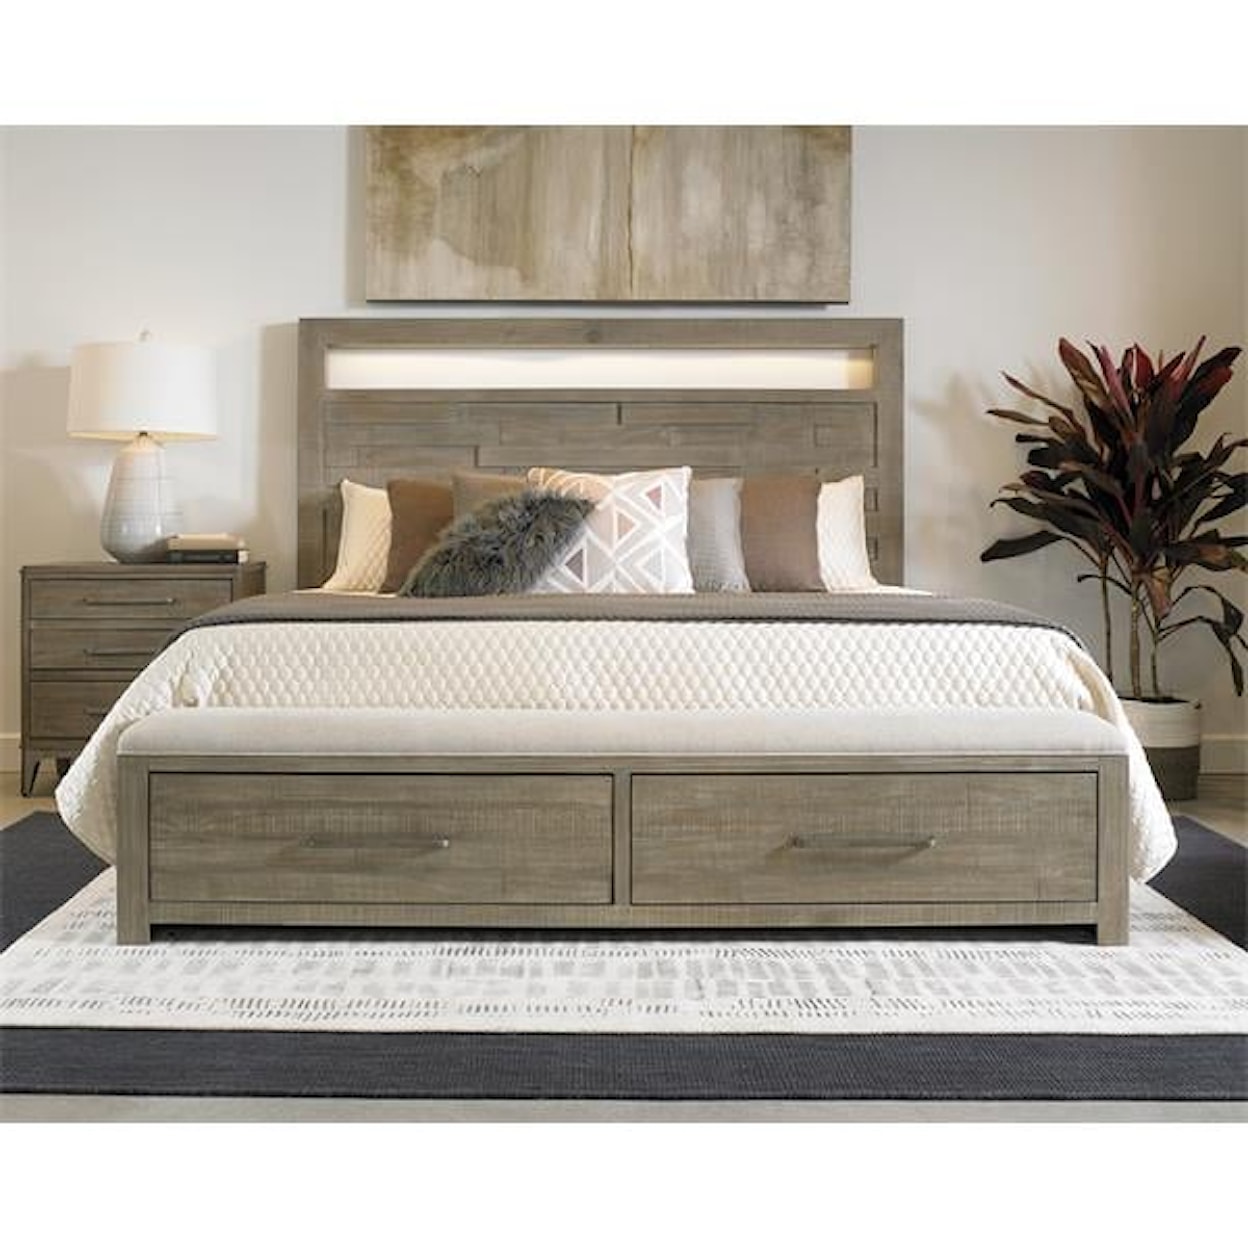 Riverside Furniture Intrigue Calfornia King LED Panel Bed